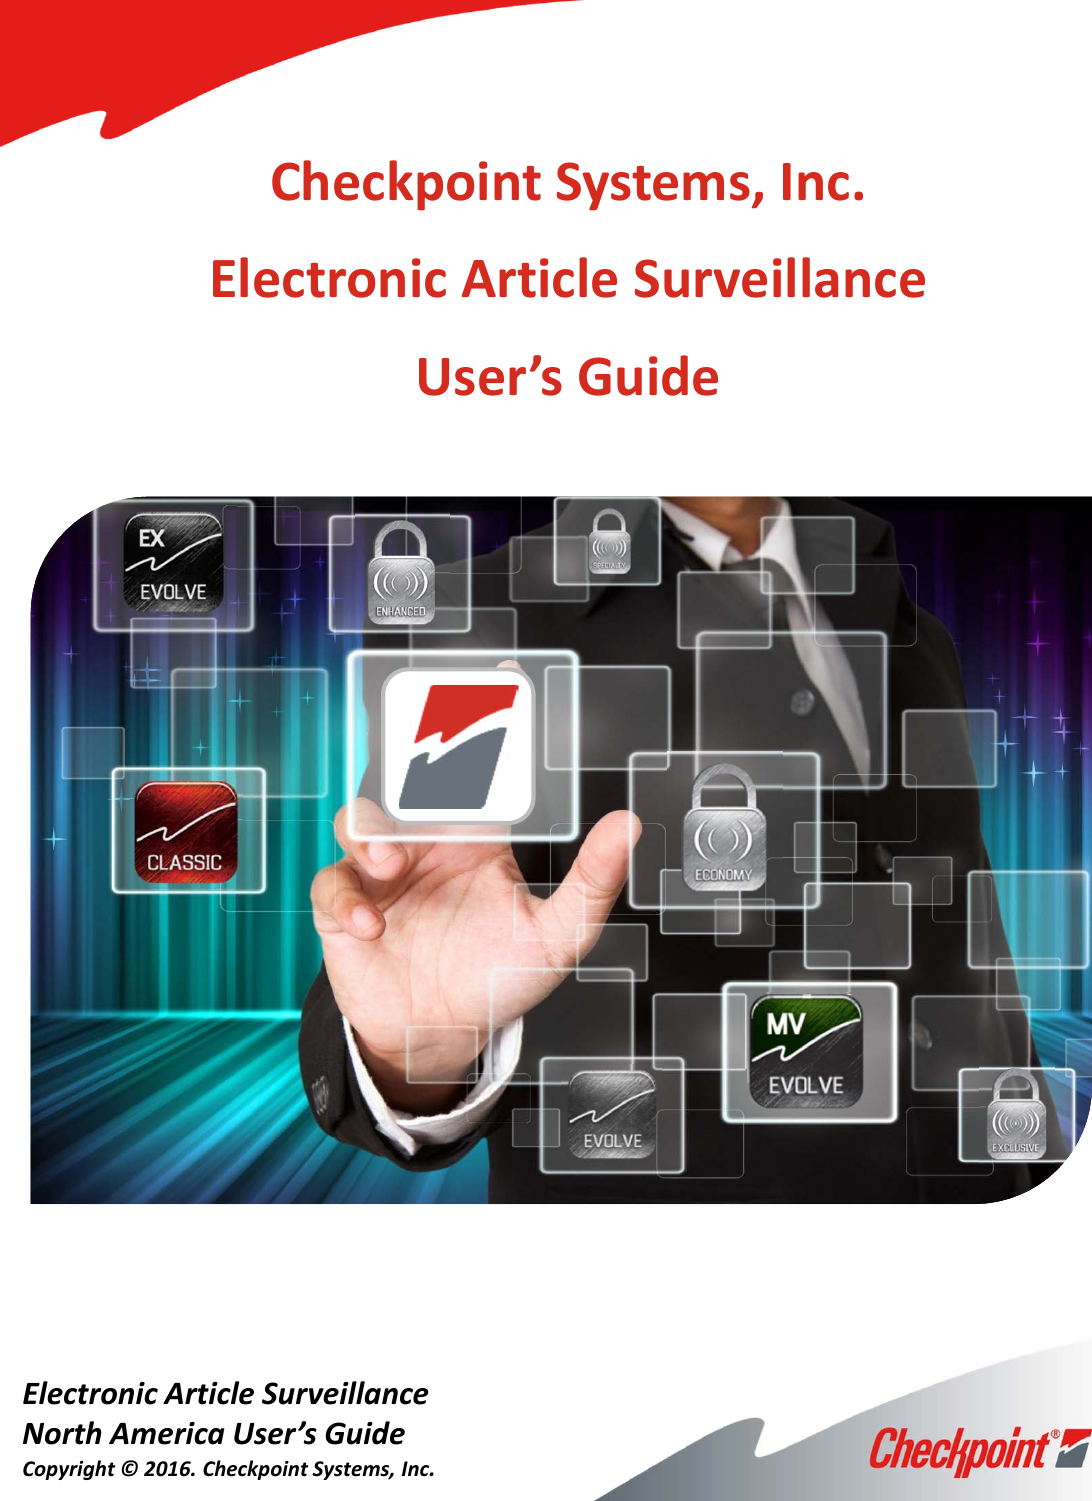 ElectronicArticleSurveillanceNorthAmericaUser’sGuideCopyright©2016.CheckpointSystems,Inc.CheckpointSystems,Inc.ElectronicArticleSurveillanceUser’sGuide